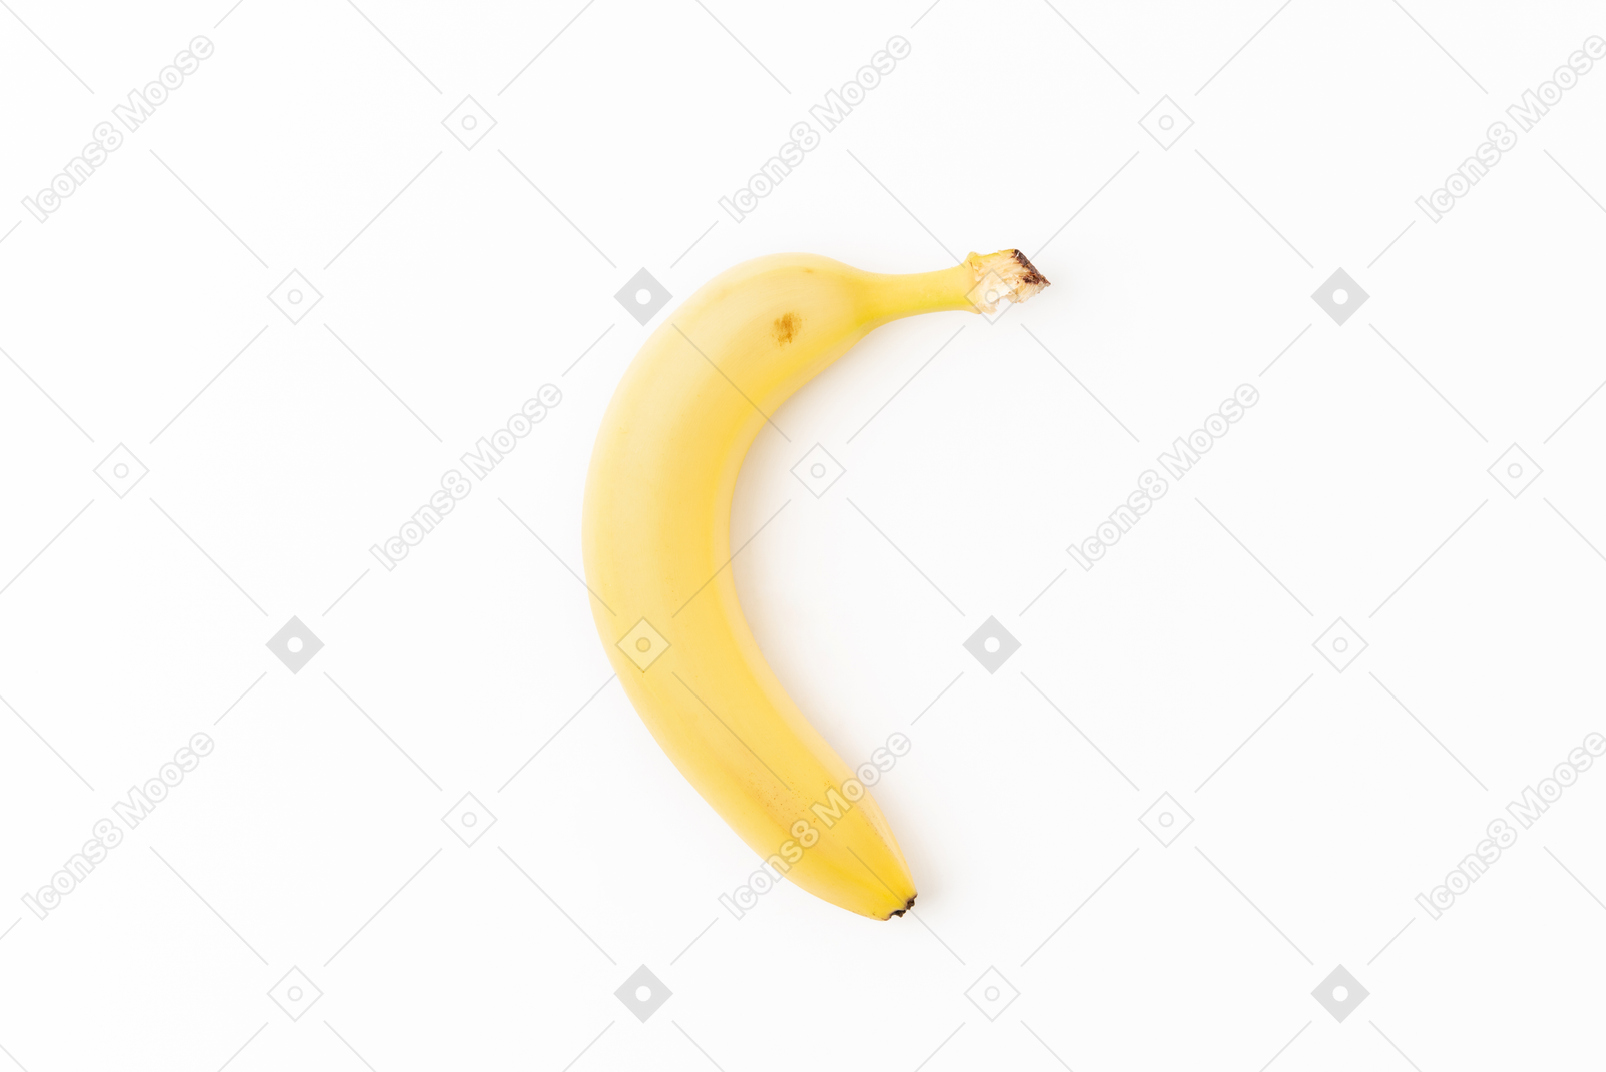 Bananas are famous as a good source of potassium